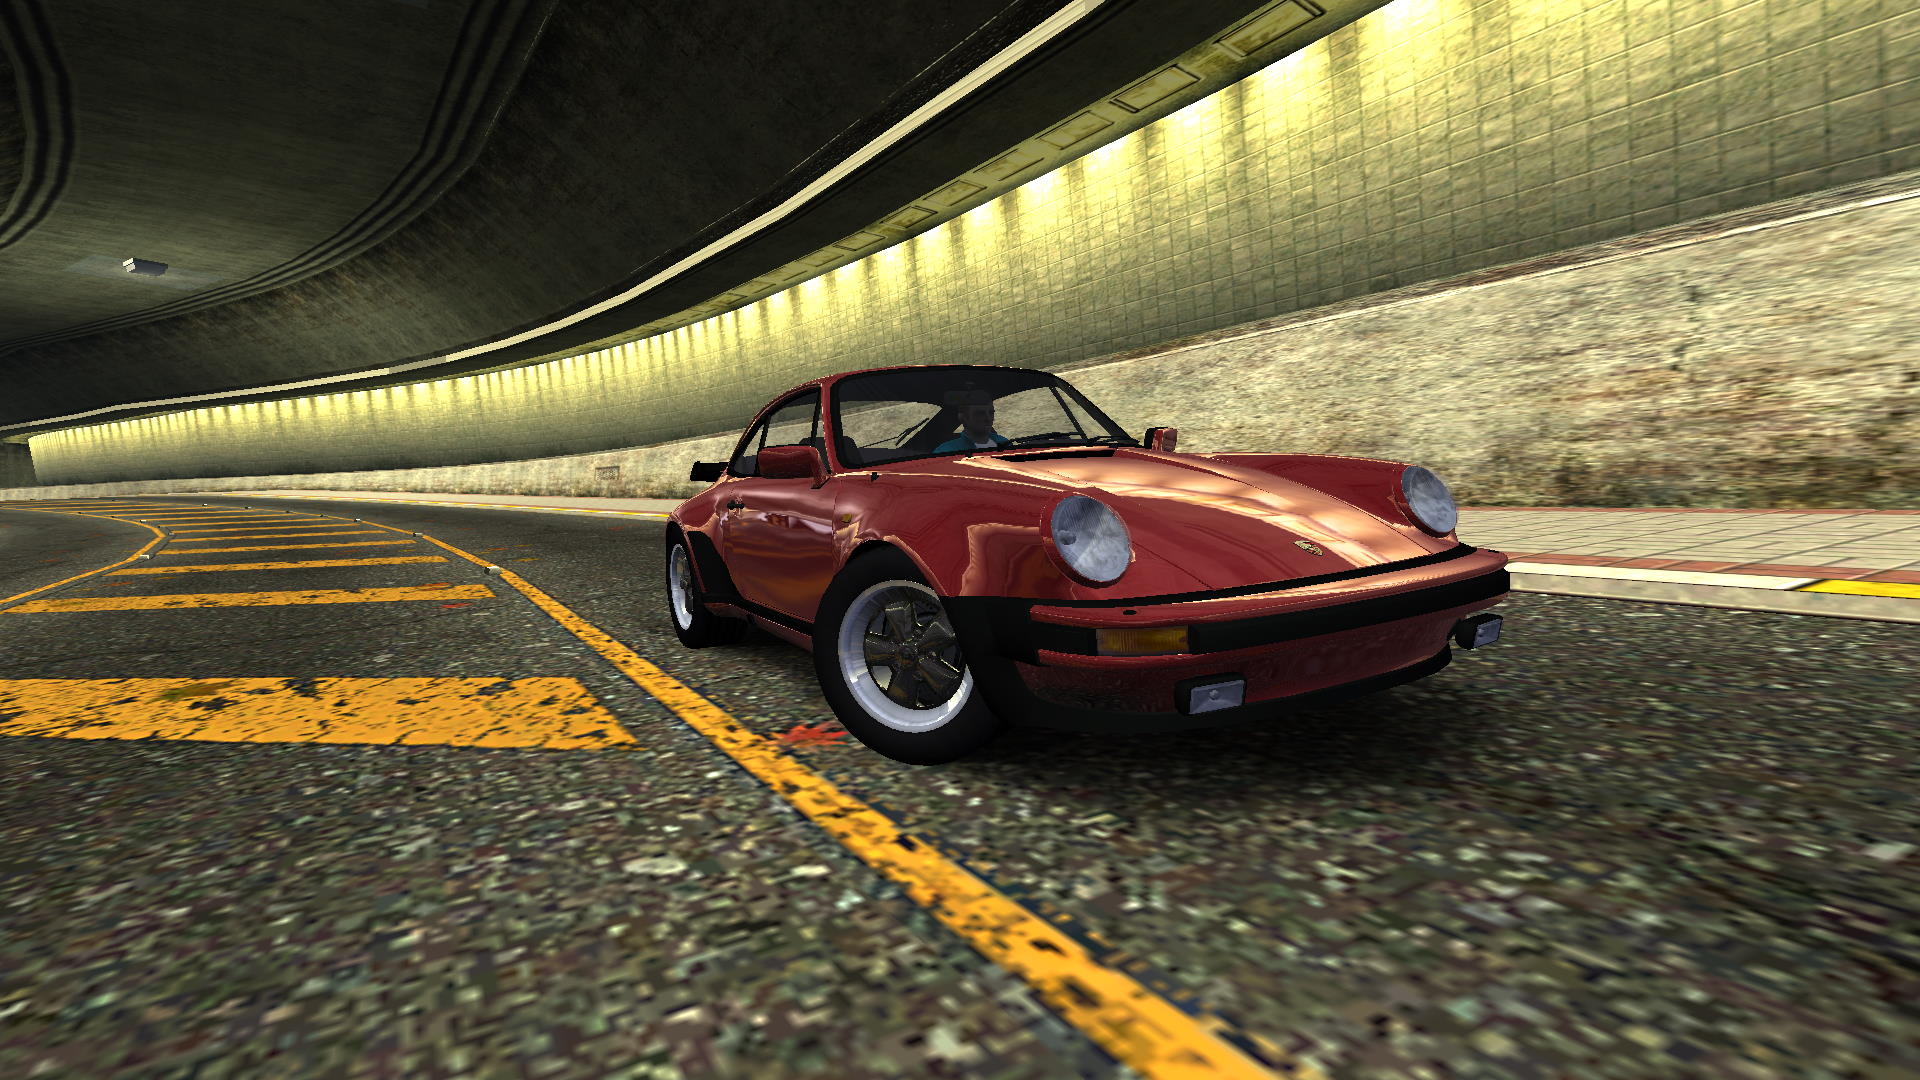 Need For Speed Most Wanted 1982 Porsche 911 Turbo 3.3